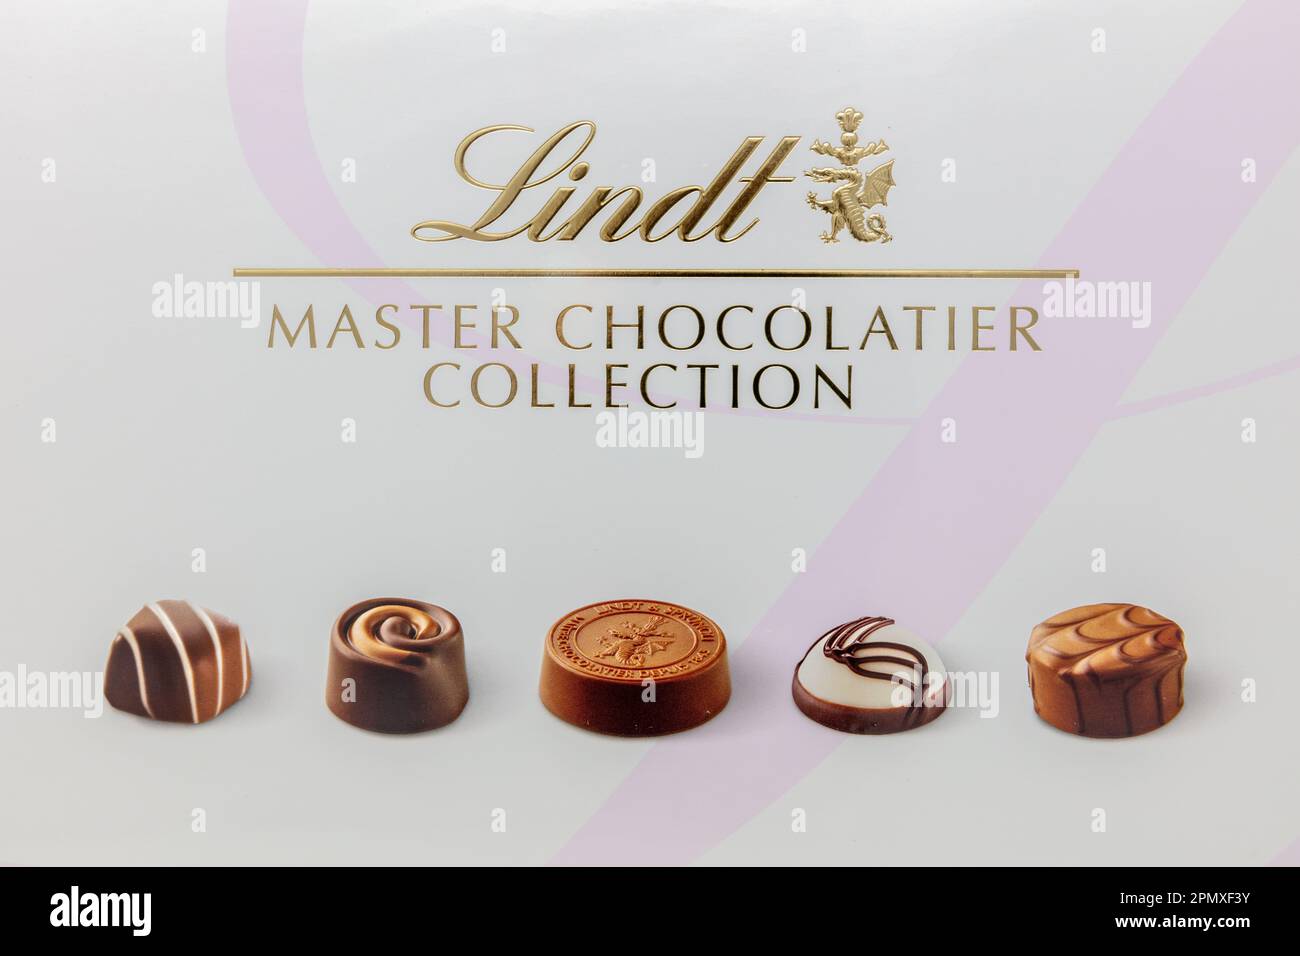 Lindt Master Chocolatier Collection Photo Stock - Alamy